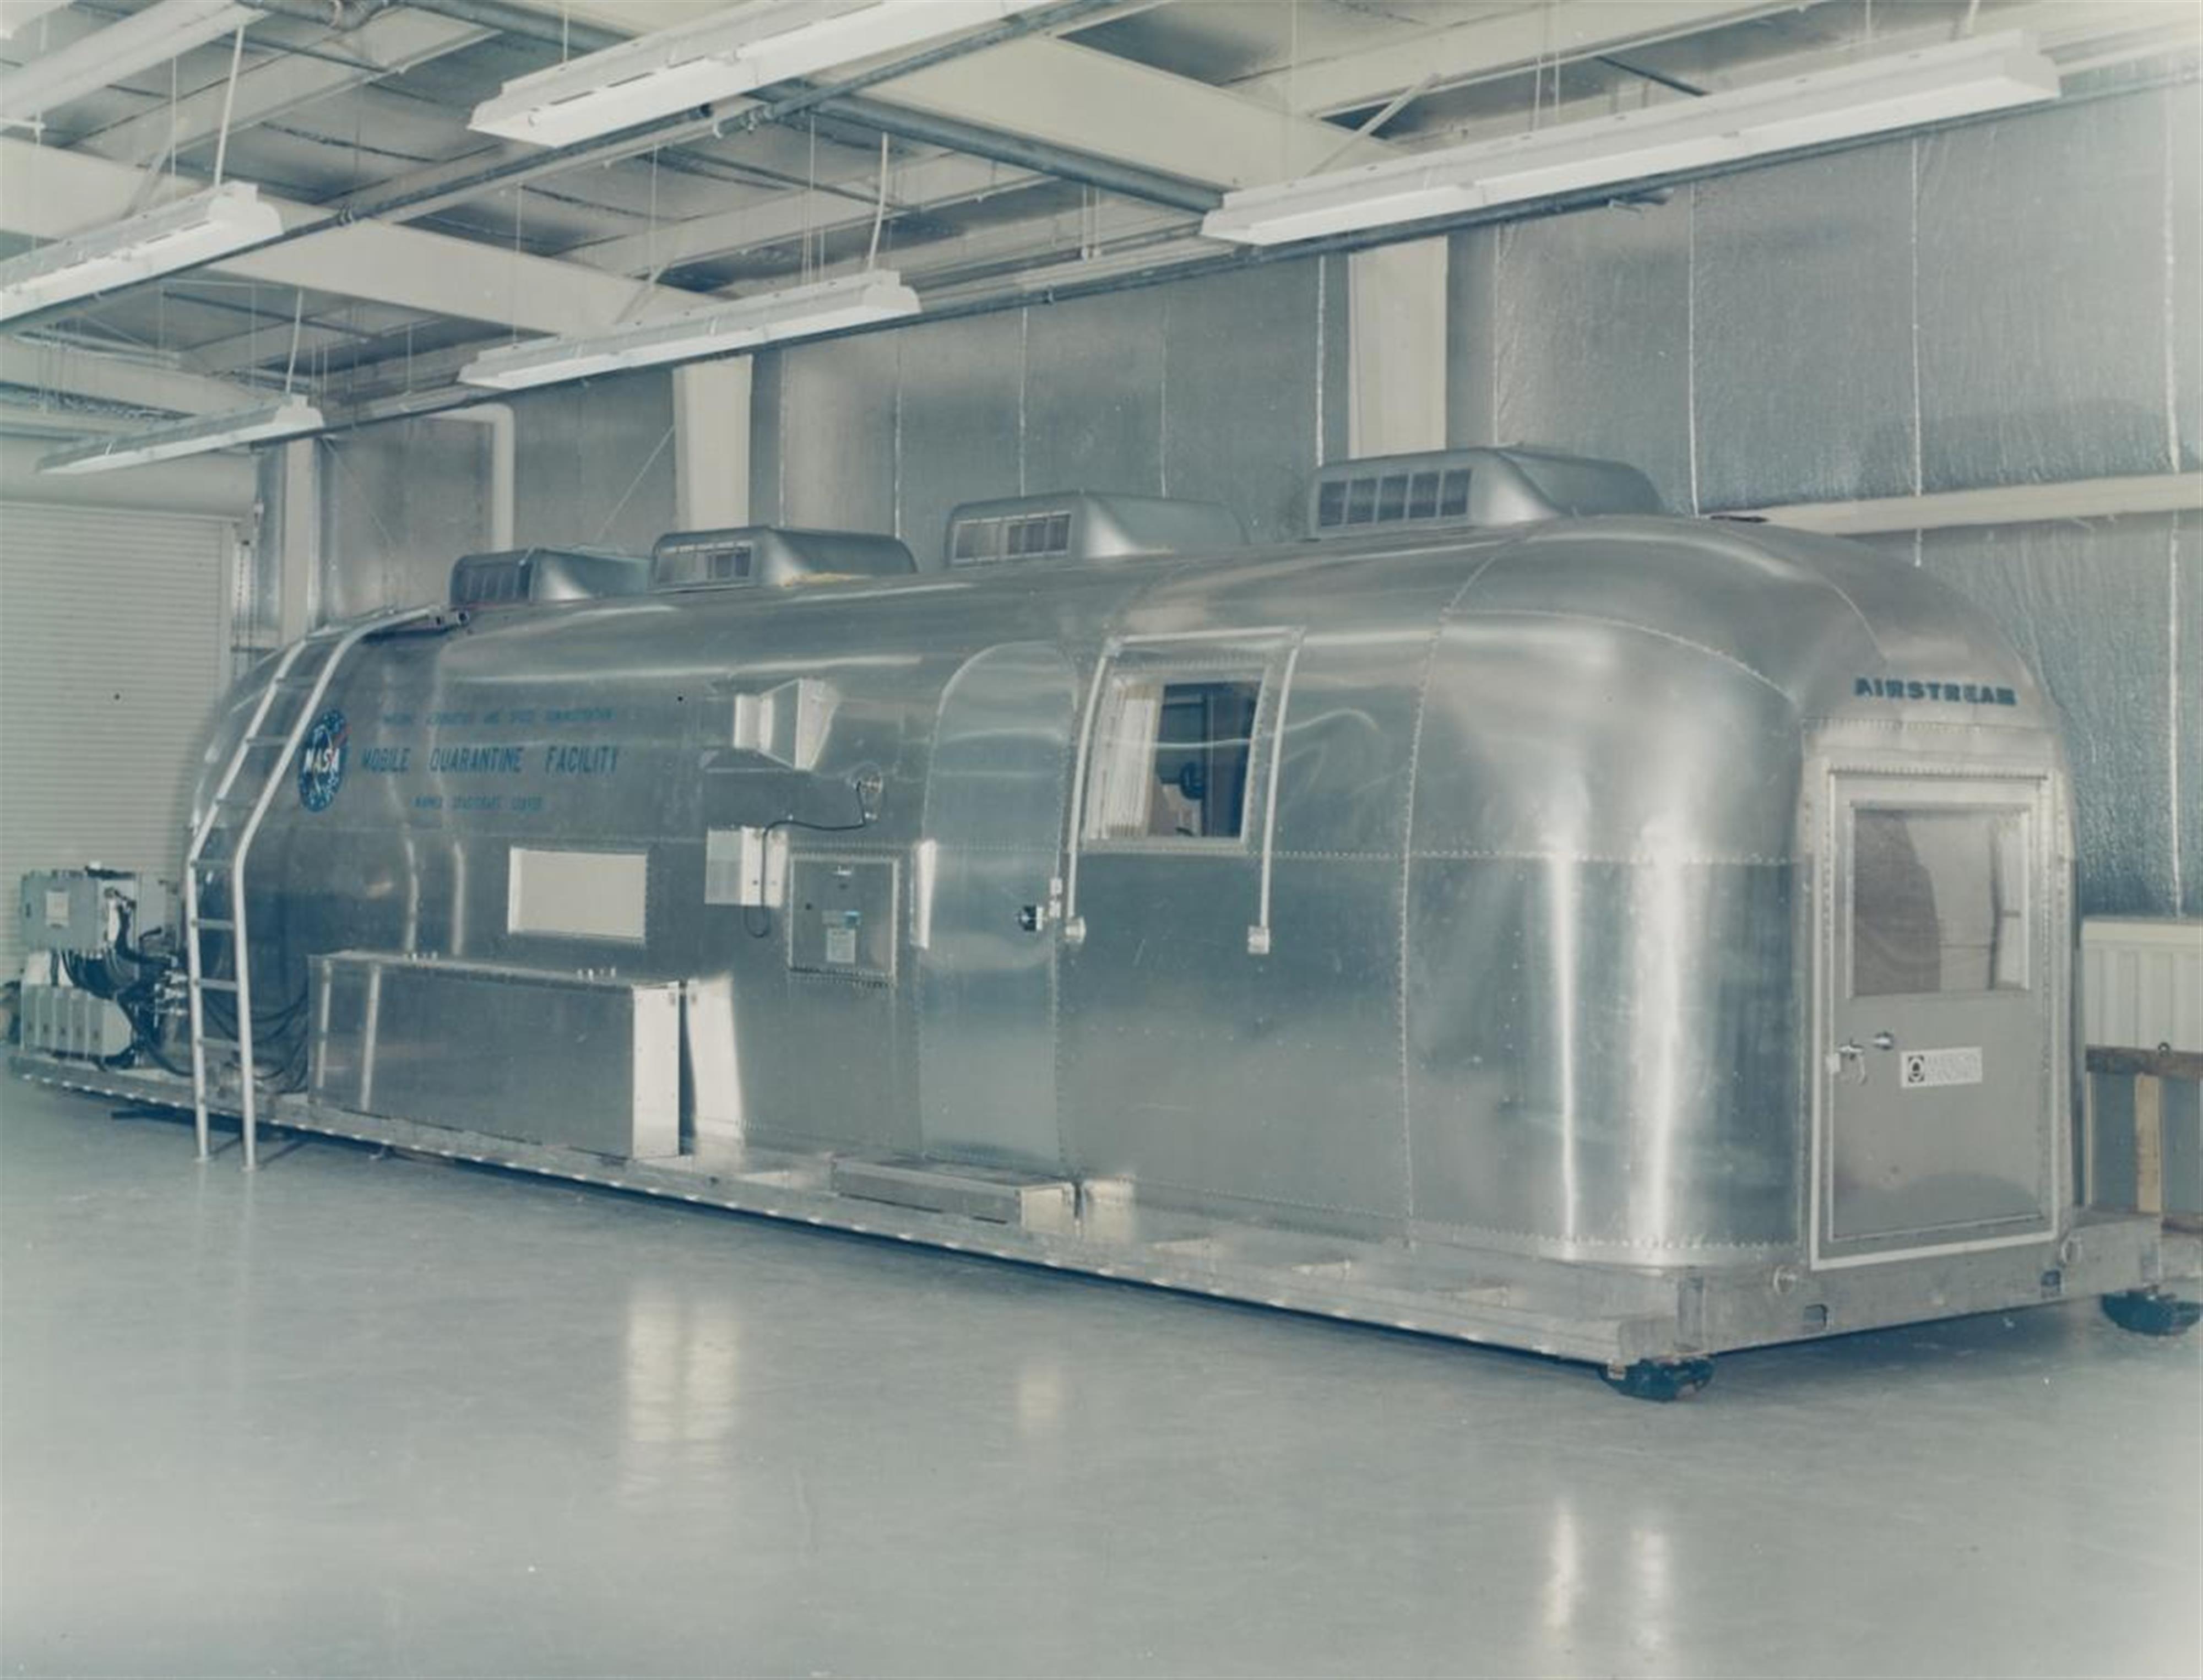 NASA - Mobile quarantine facility built by NASA for astronauts returning from the moon - image-1